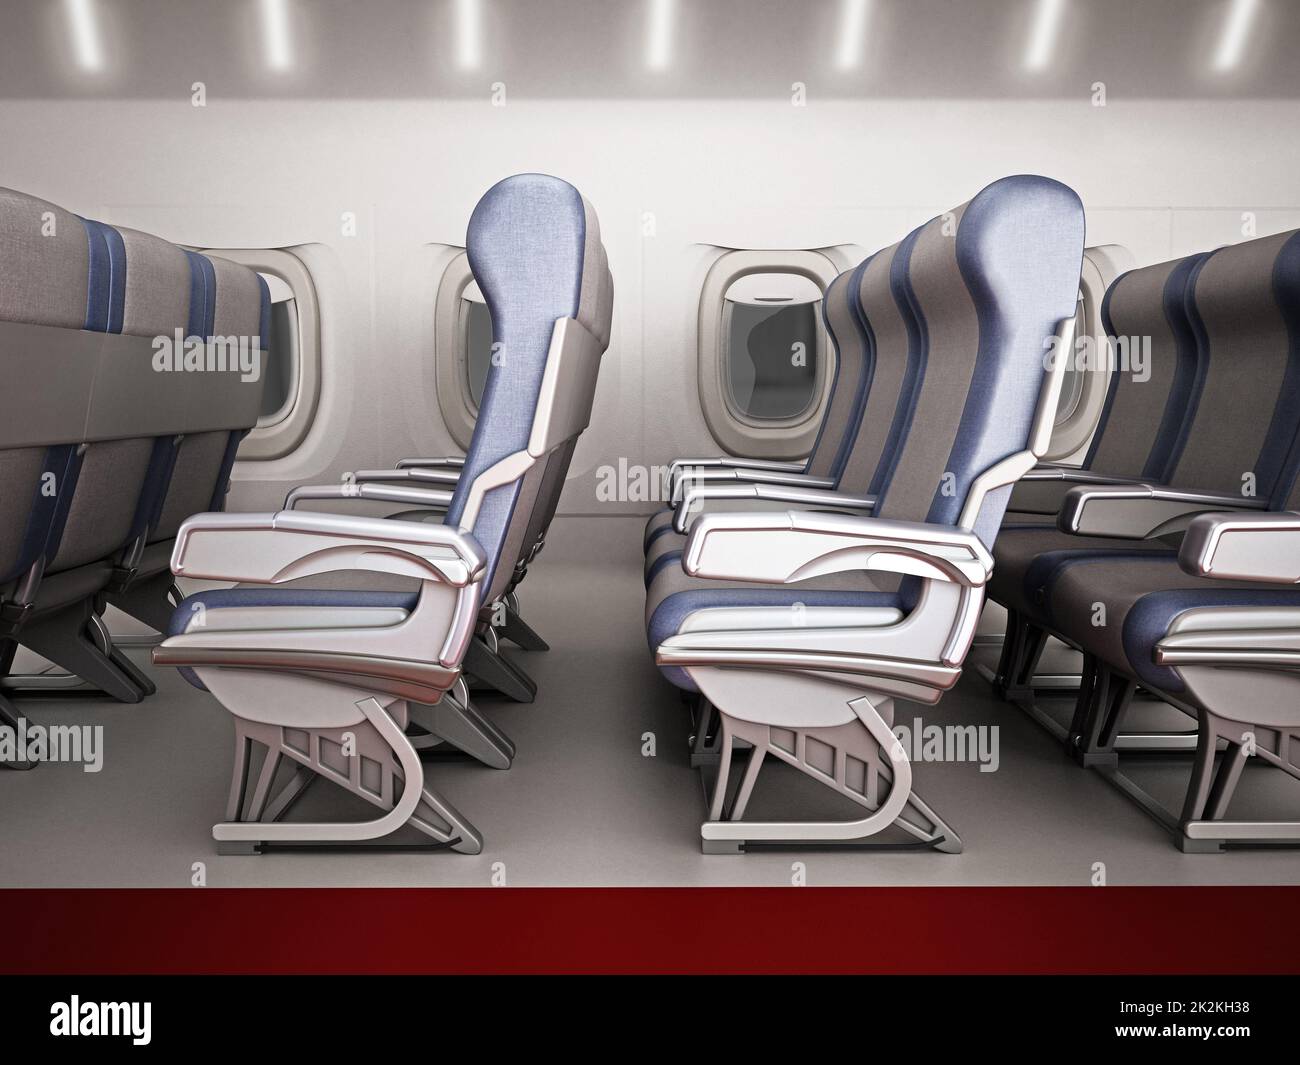 1,181 Airplane Front Seat Images, Stock Photos, 3D objects